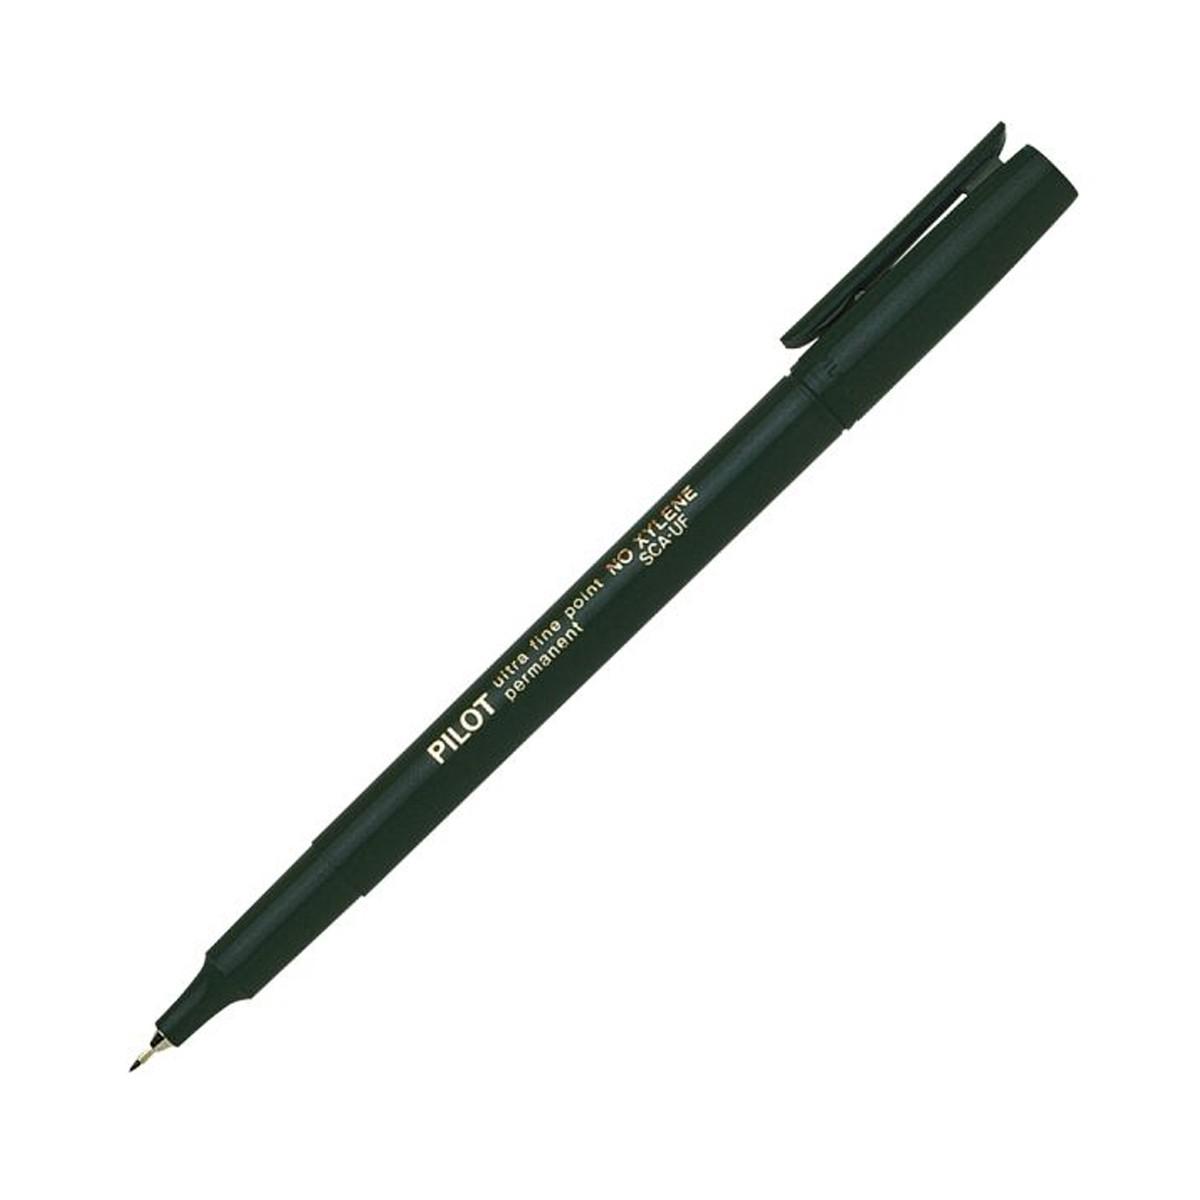 Outdoor Durable (5+ years) Permanent Black Marker – Fosco Connect